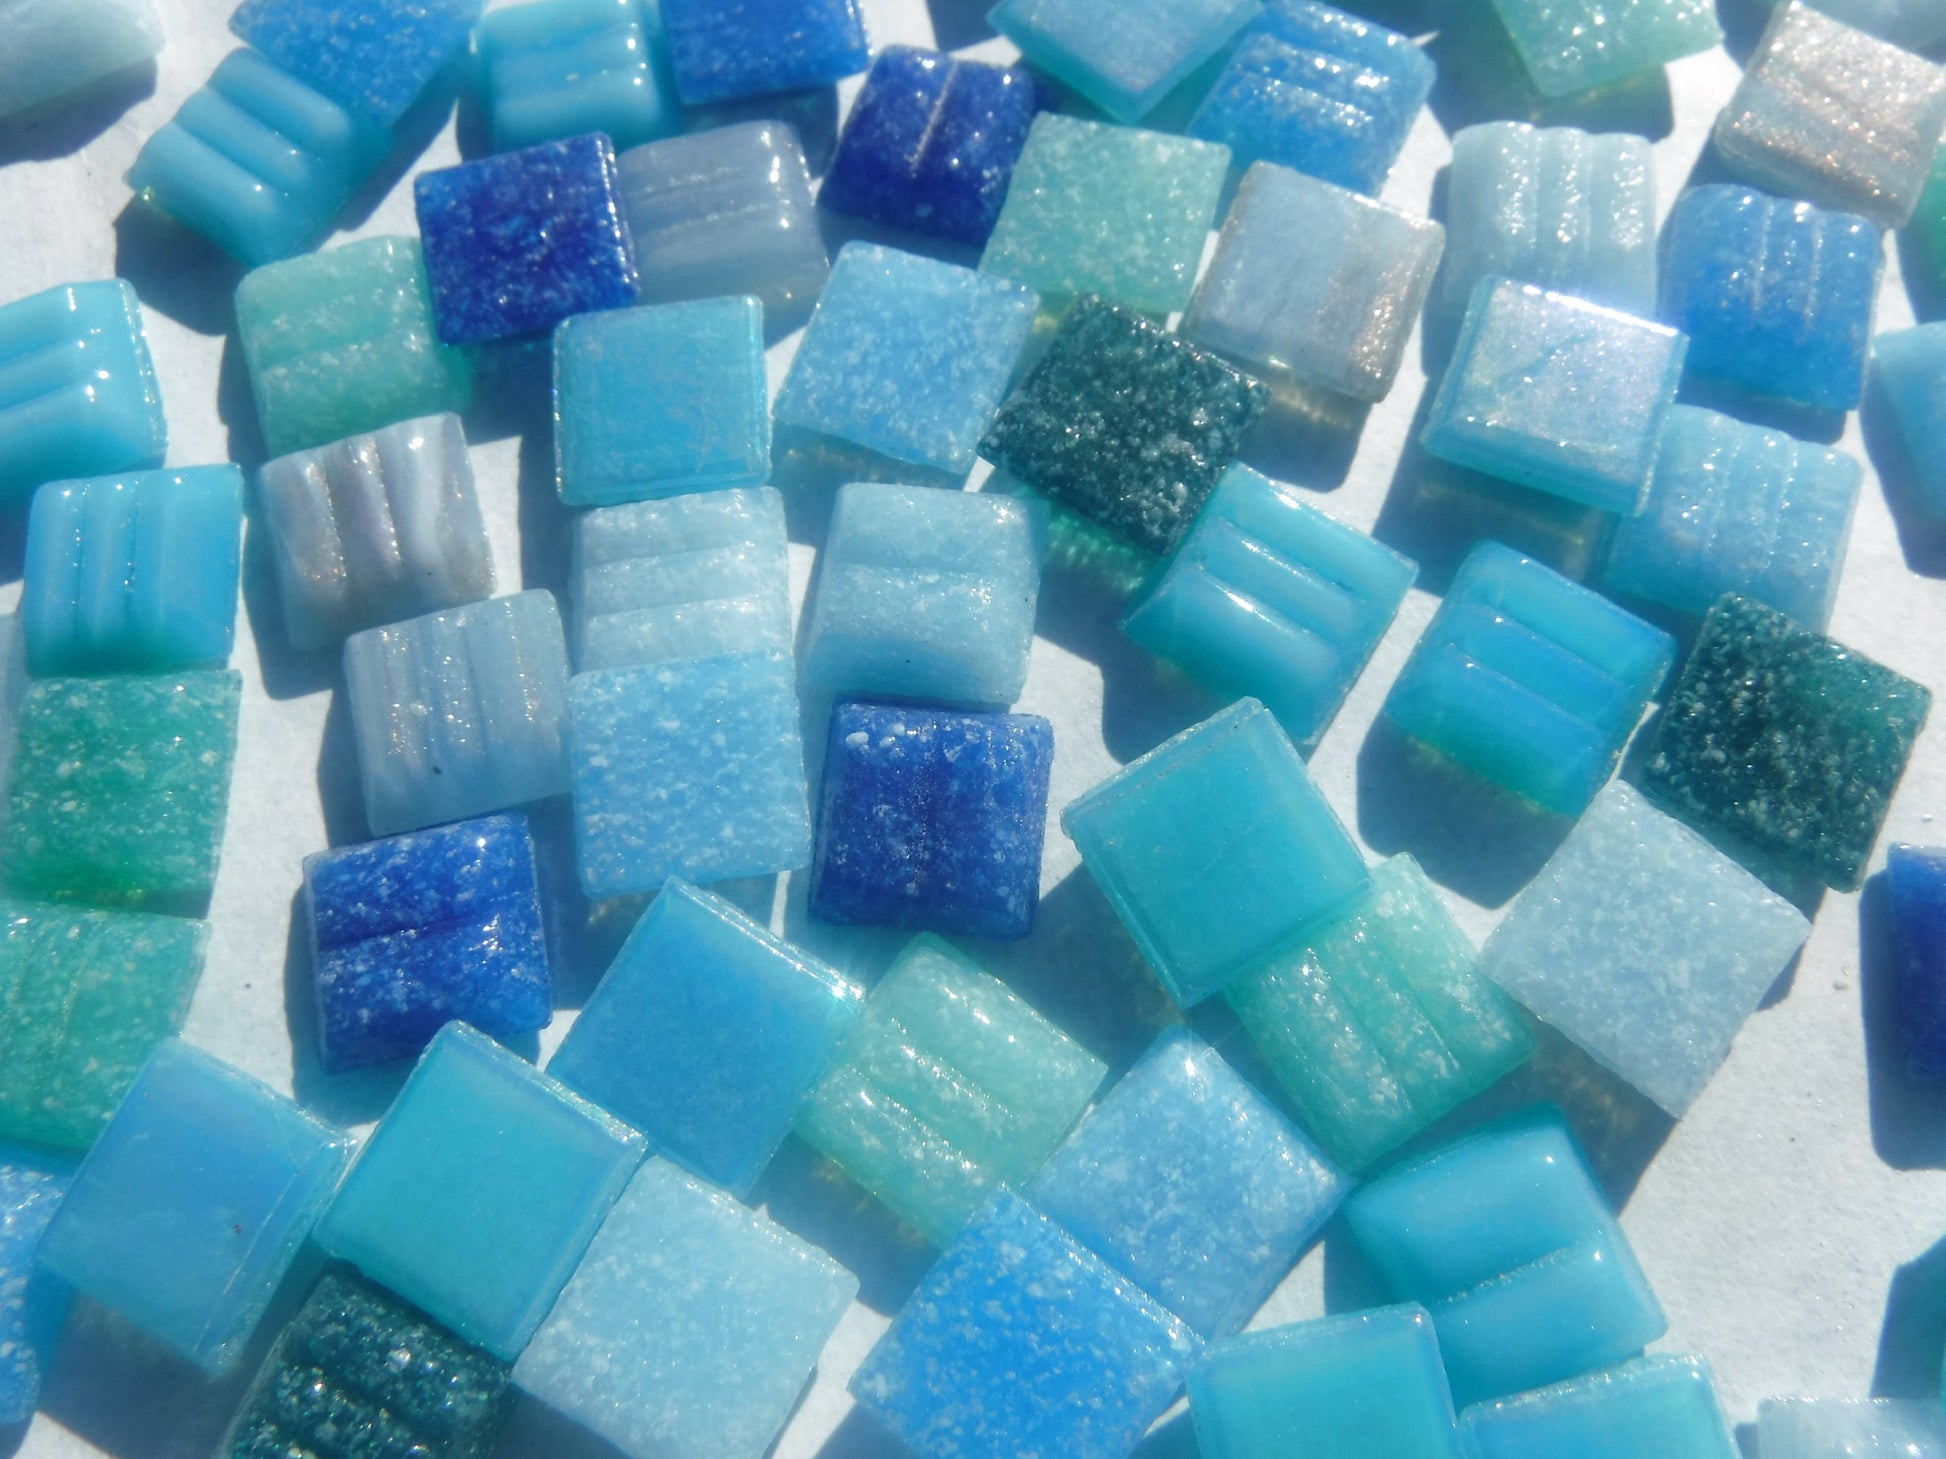 Blue and Green Mix Glass Mosaic Tiles Squares - 1 cm - 100g of Venetian and Vitreous Glass in Aqua Vita Assortment - Approx 140 Tiles